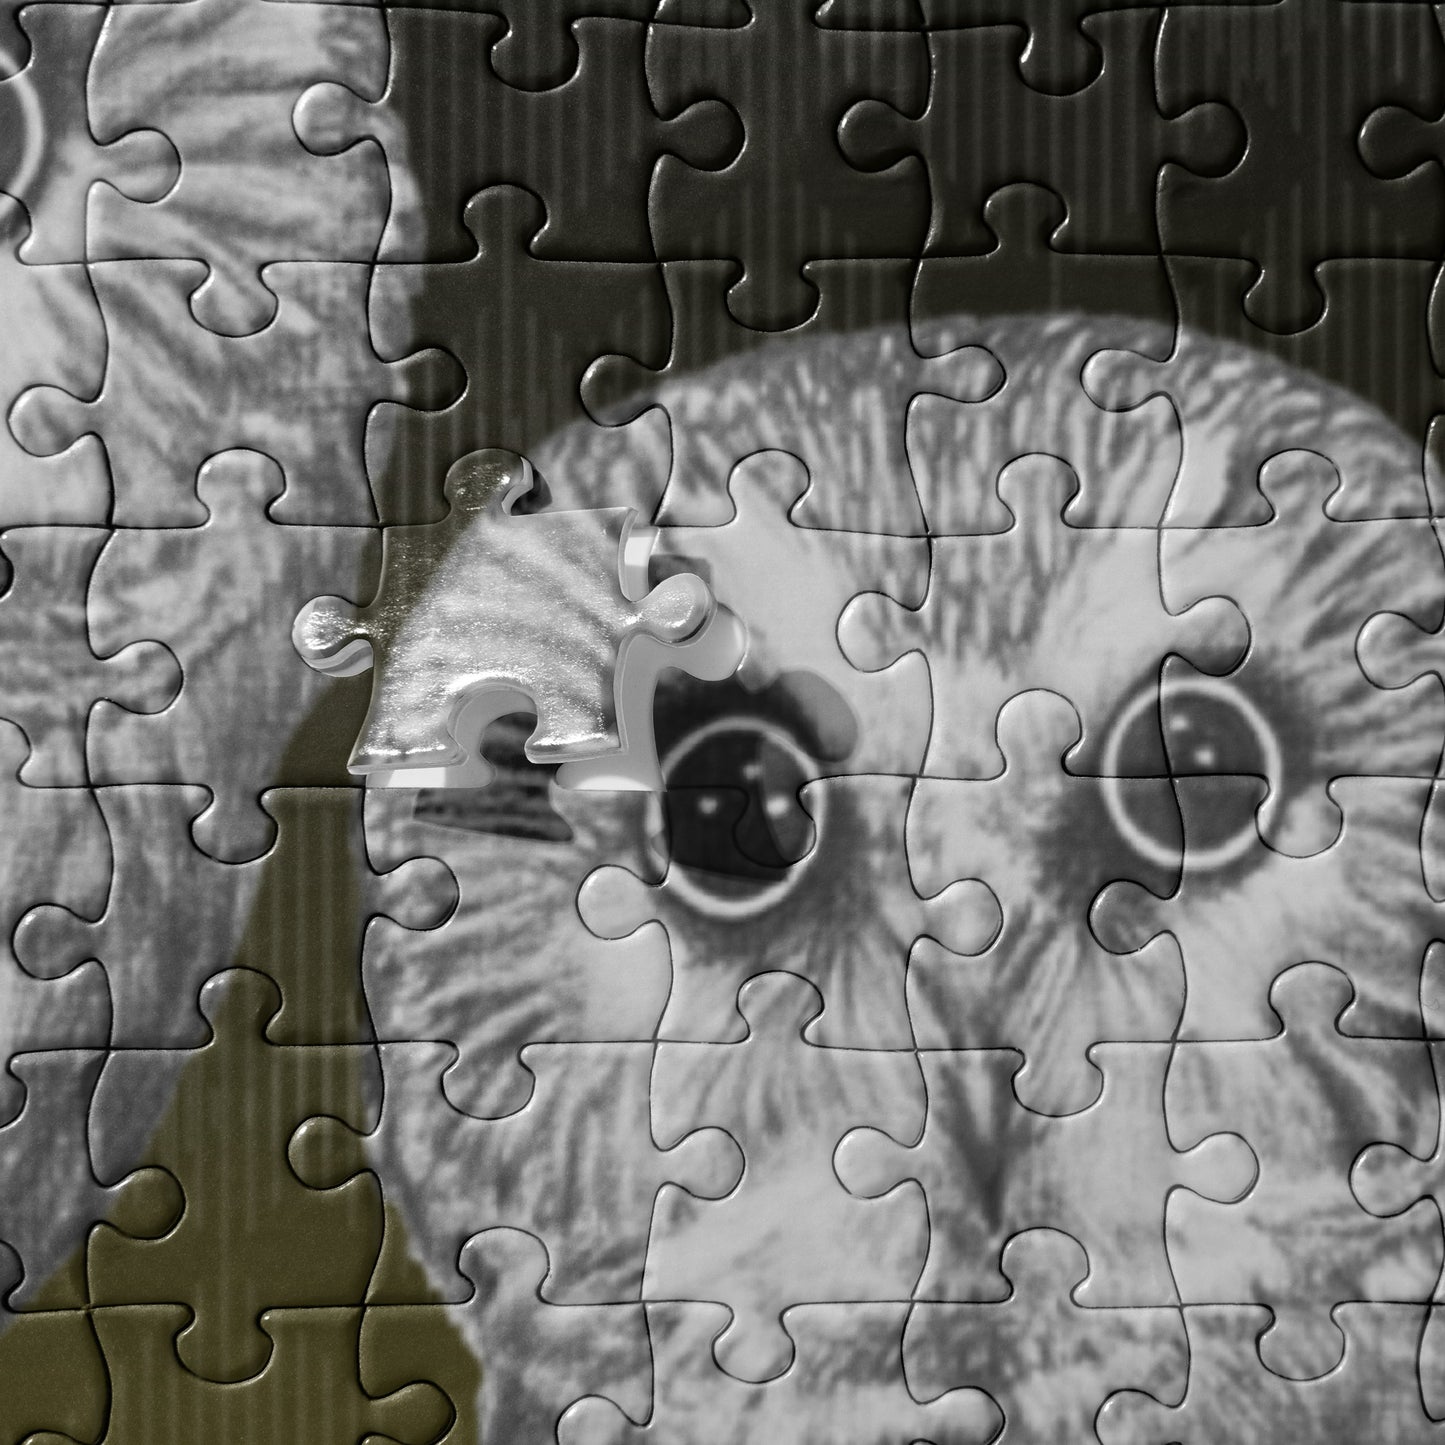 This "Owl Jigsaw Puzzle" is from a drawing of mine created with a graphite pencil. it has been digitally optimized and transferred to a pressed paper chipboard which makes it suitable for framing.